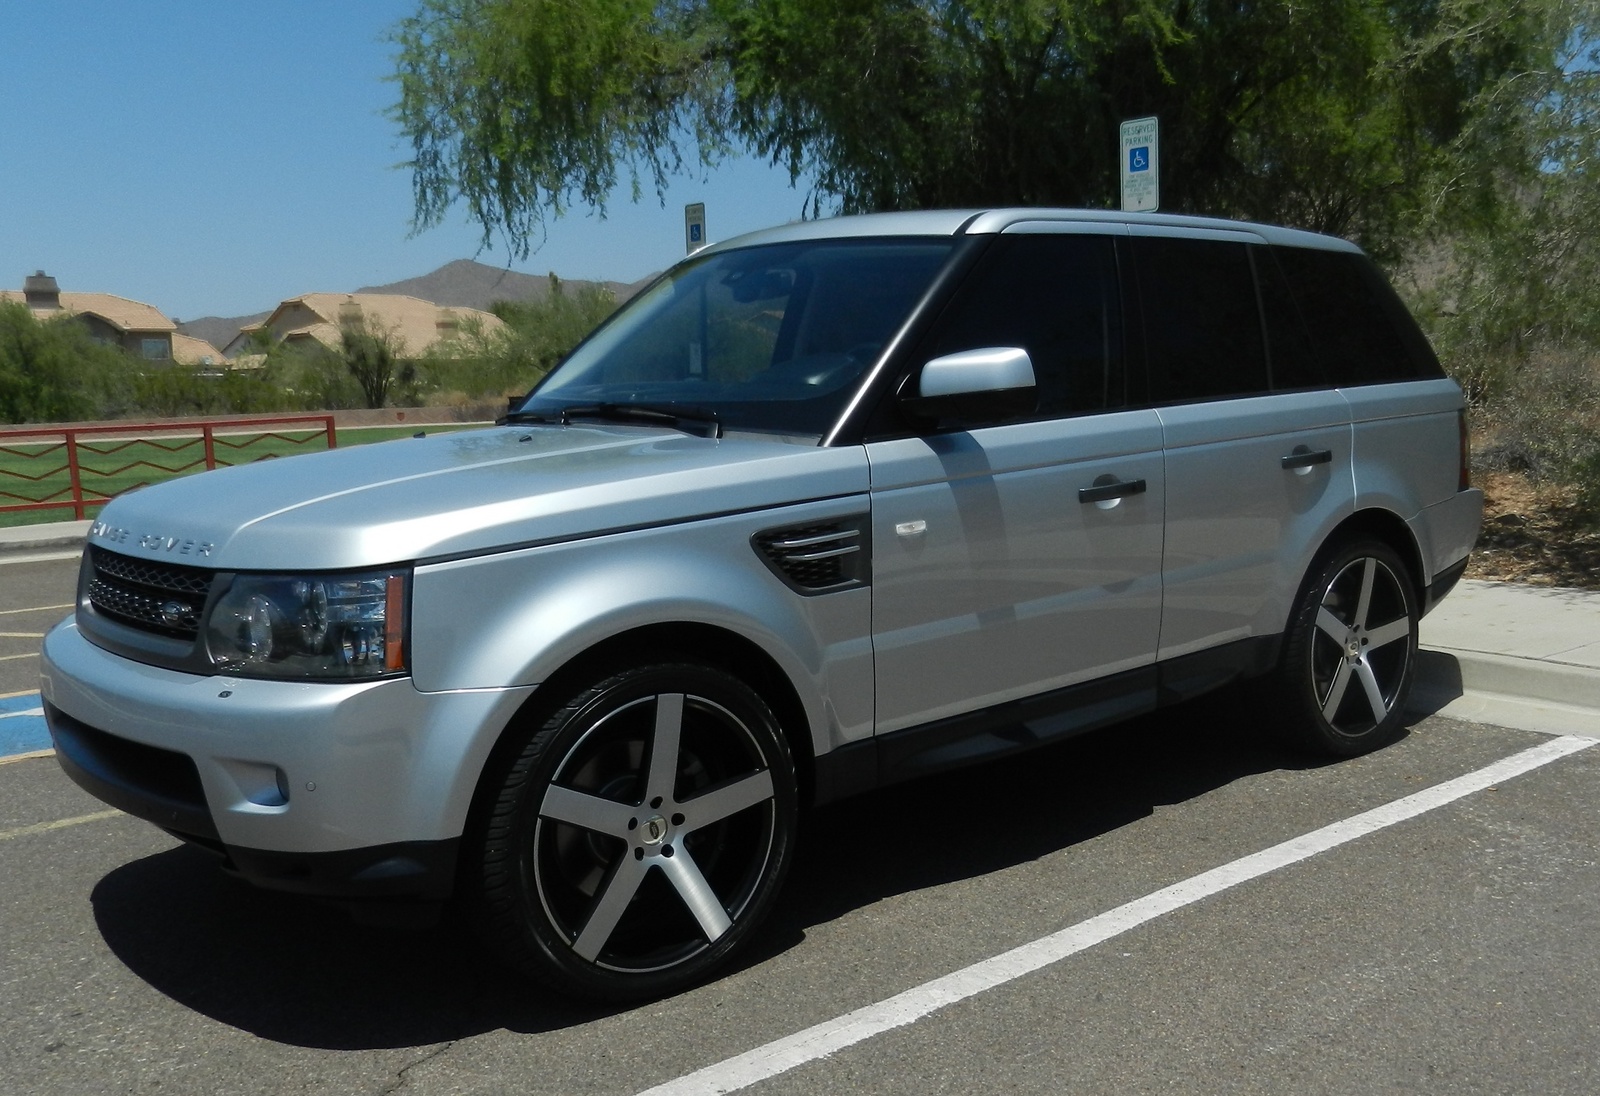 Picture Of Land Rover Range Sport Hse Exterior